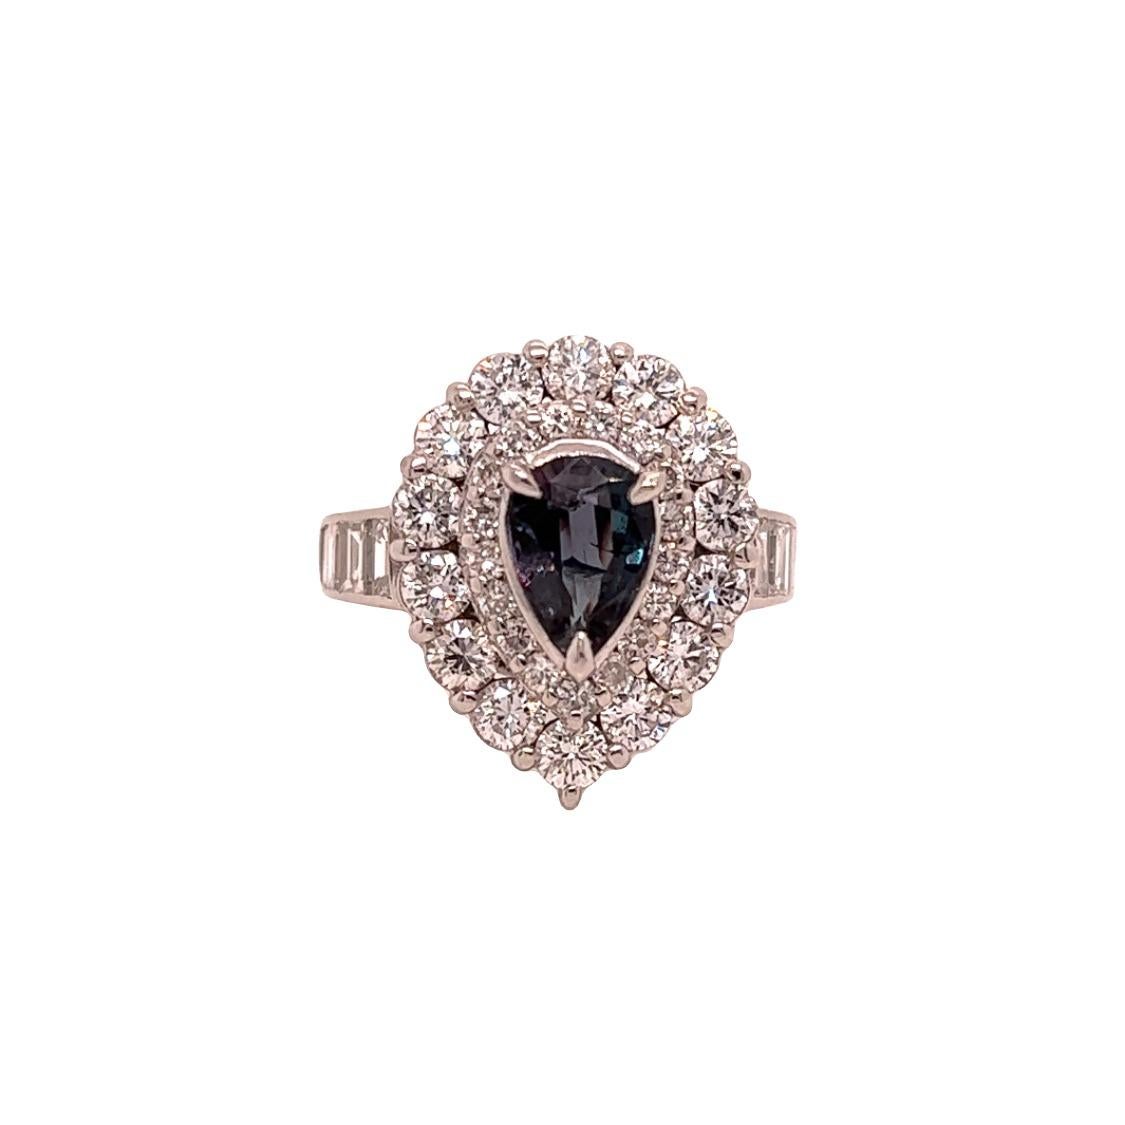 This is a gorgeous natural AAA quality pear shaped Alexandrite surrounded by a dainty diamond halo that is set in a vintage platinum setting. This ring features a natural 0.99 pear alexandrite that is certified by the Gemological Institute of